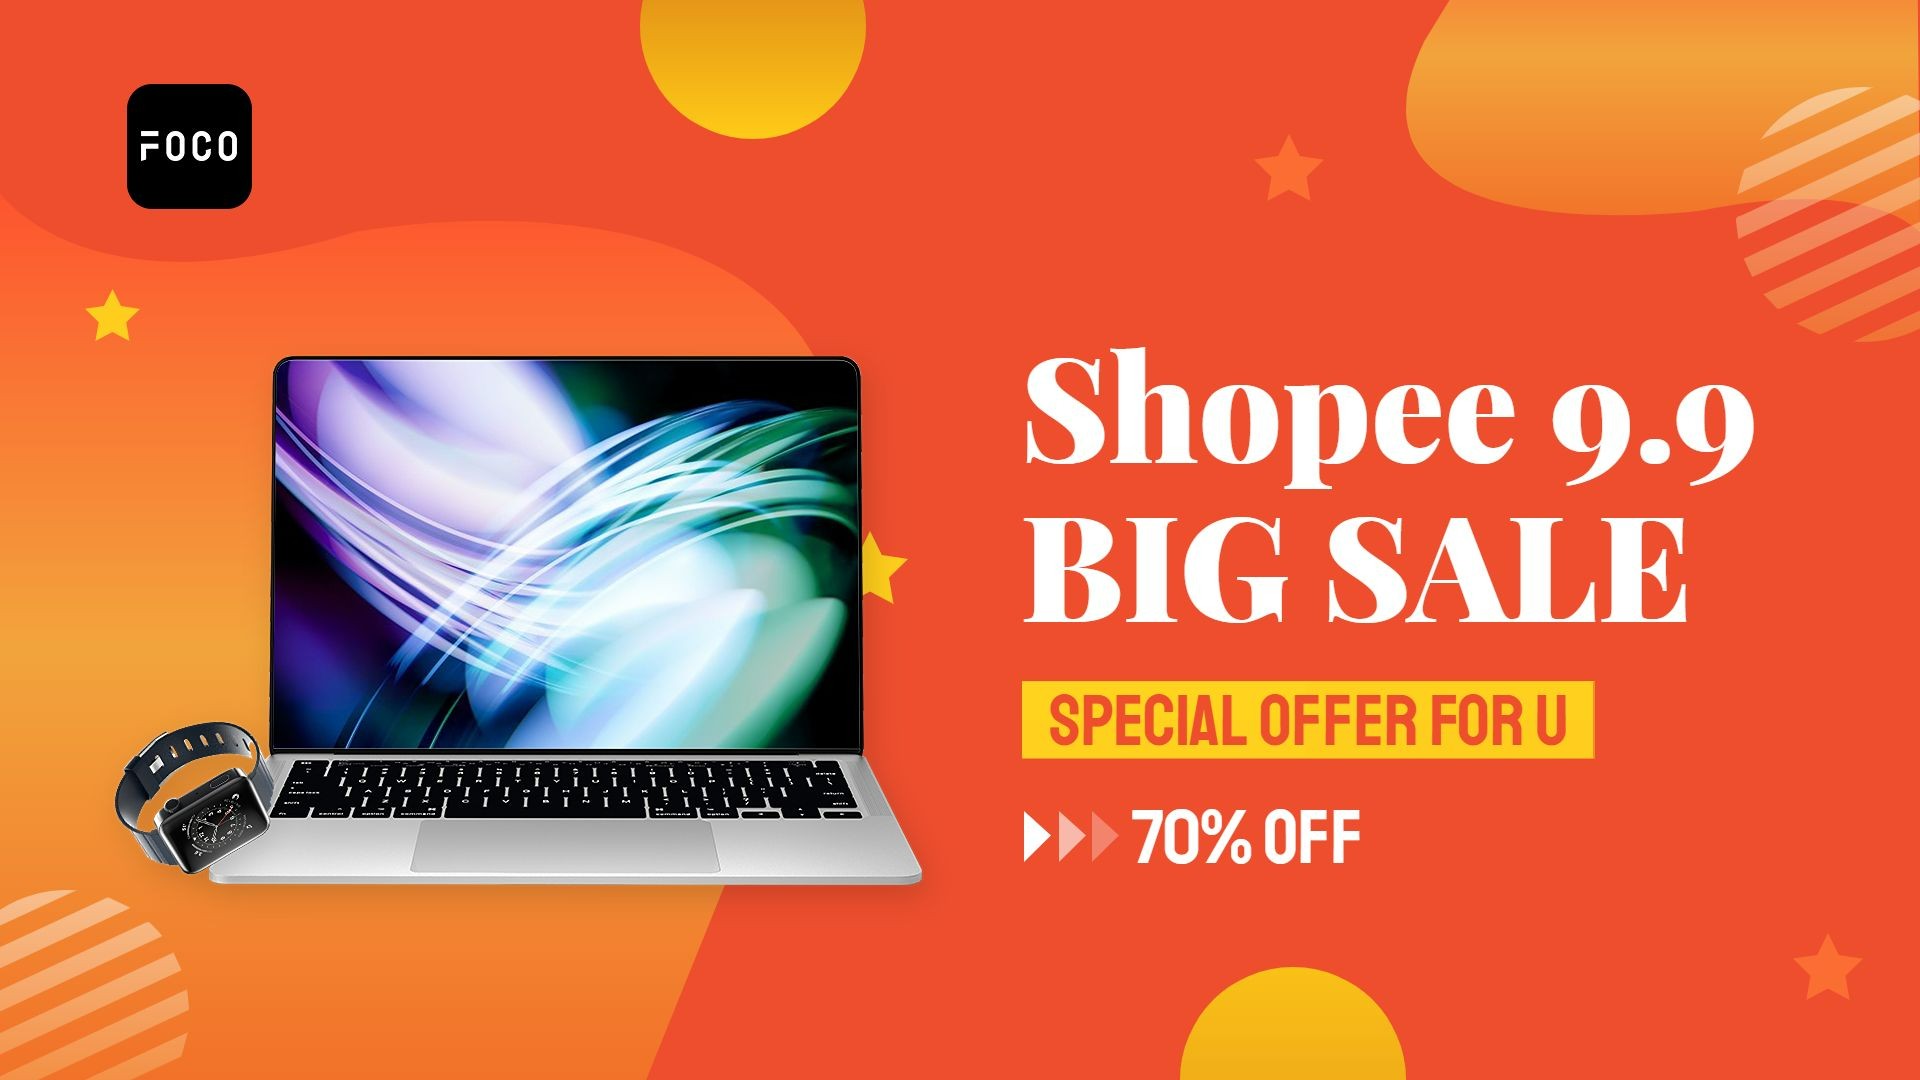 Shopee 9.9 Computer Laptop Smart Electronic Device Discount Sale Promo Ecommerce Banner